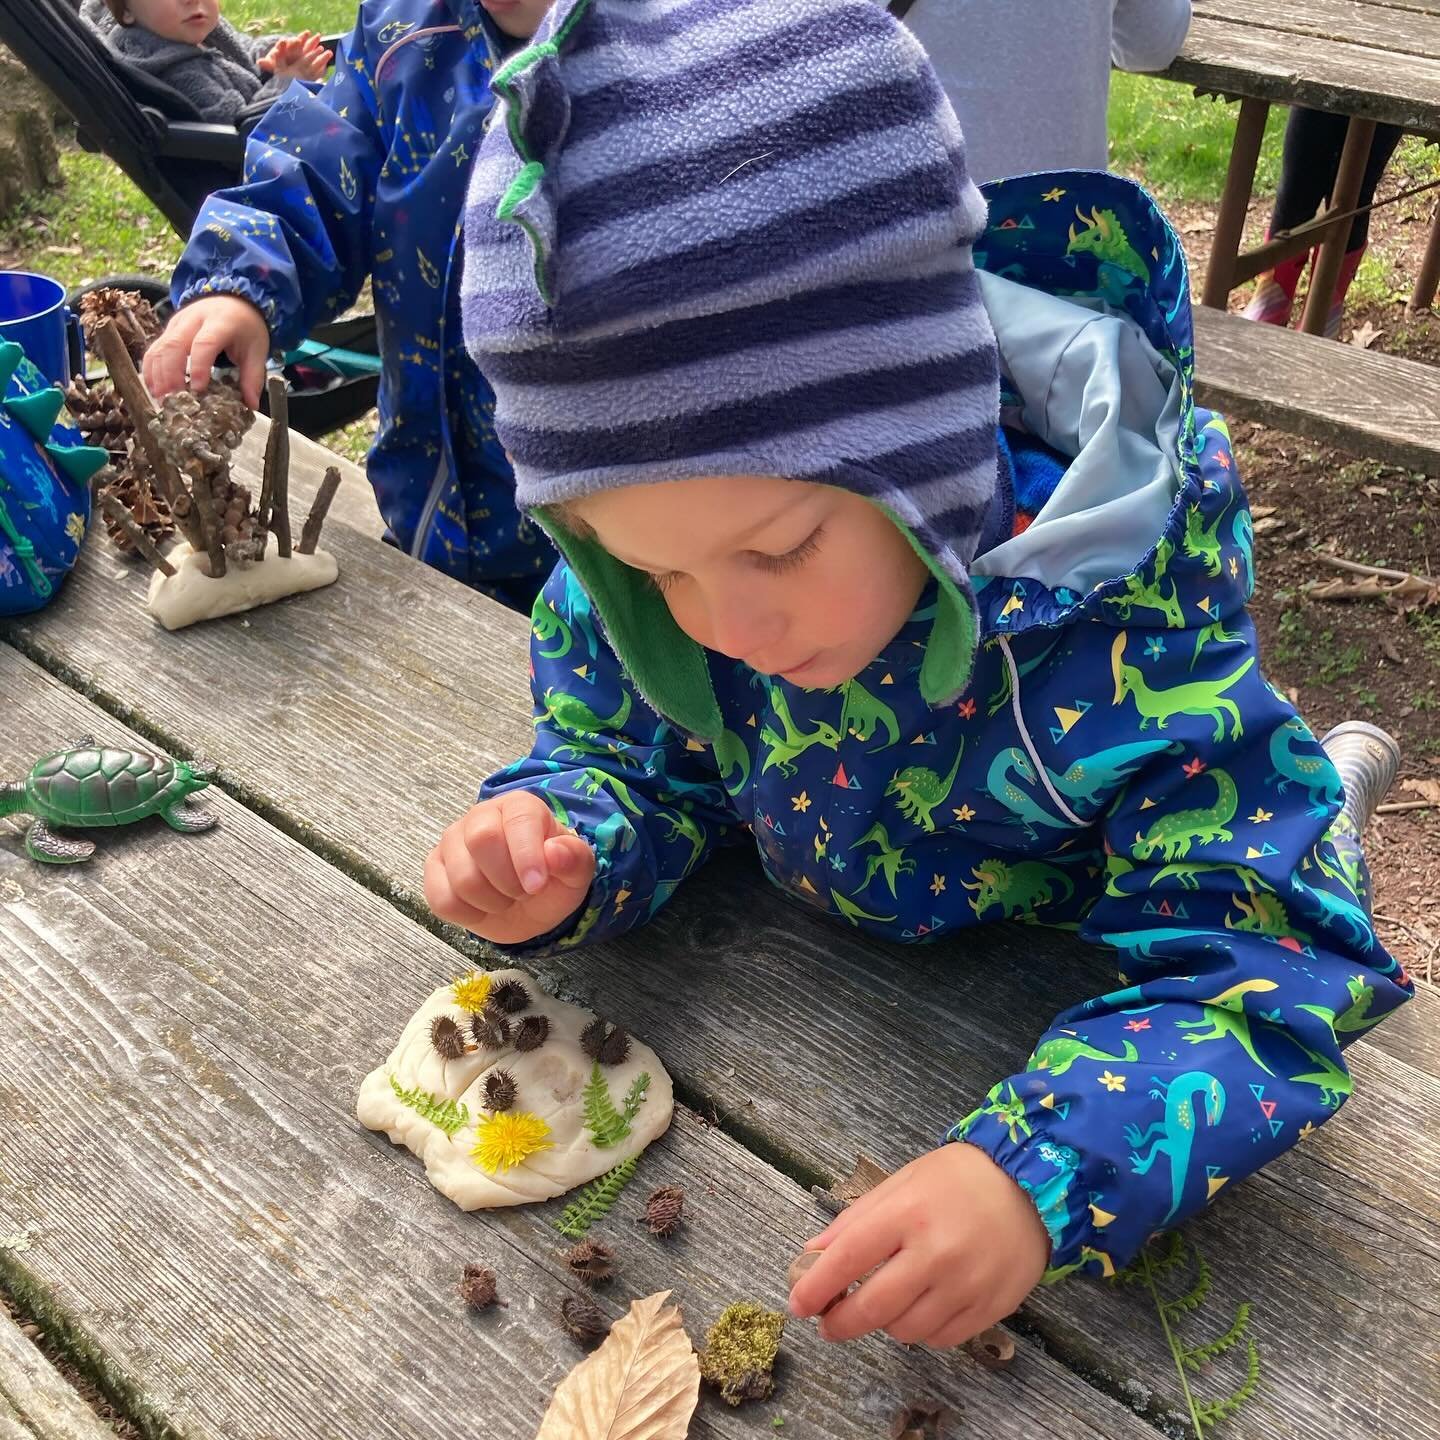 Today we celebrated Earth Day with our friends at the Thursday Explore Together class. We read My Friend Earth and talked about things we love about the Earth as well as how we can take care of it. To celebrate, explorers made treats and other creati